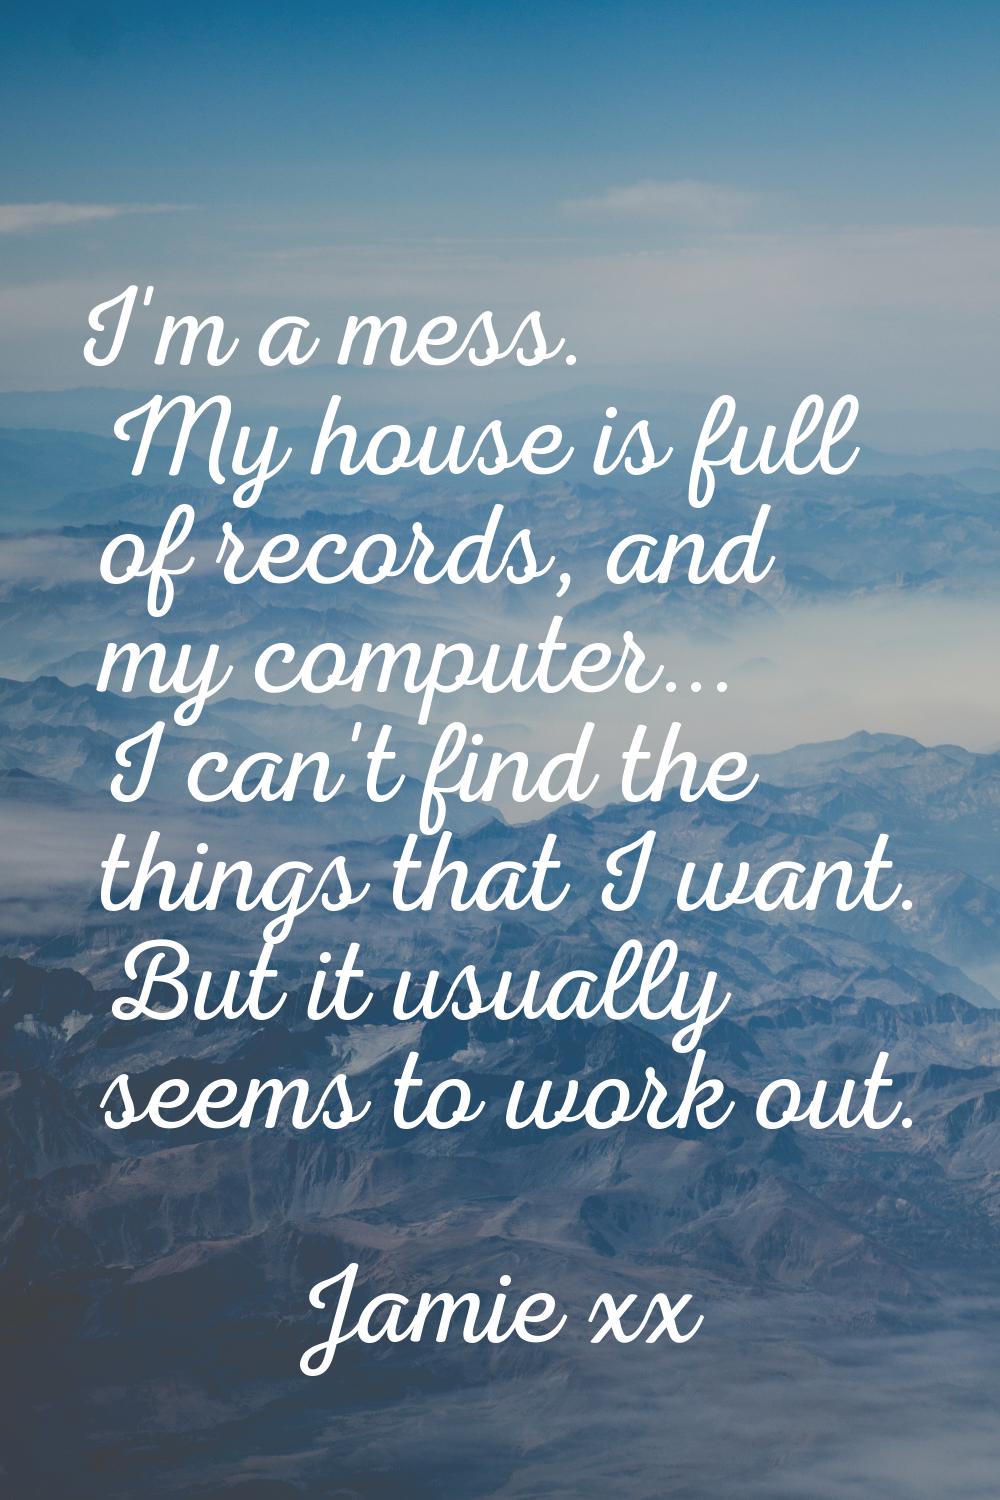 I'm a mess. My house is full of records, and my computer... I can't find the things that I want. Bu